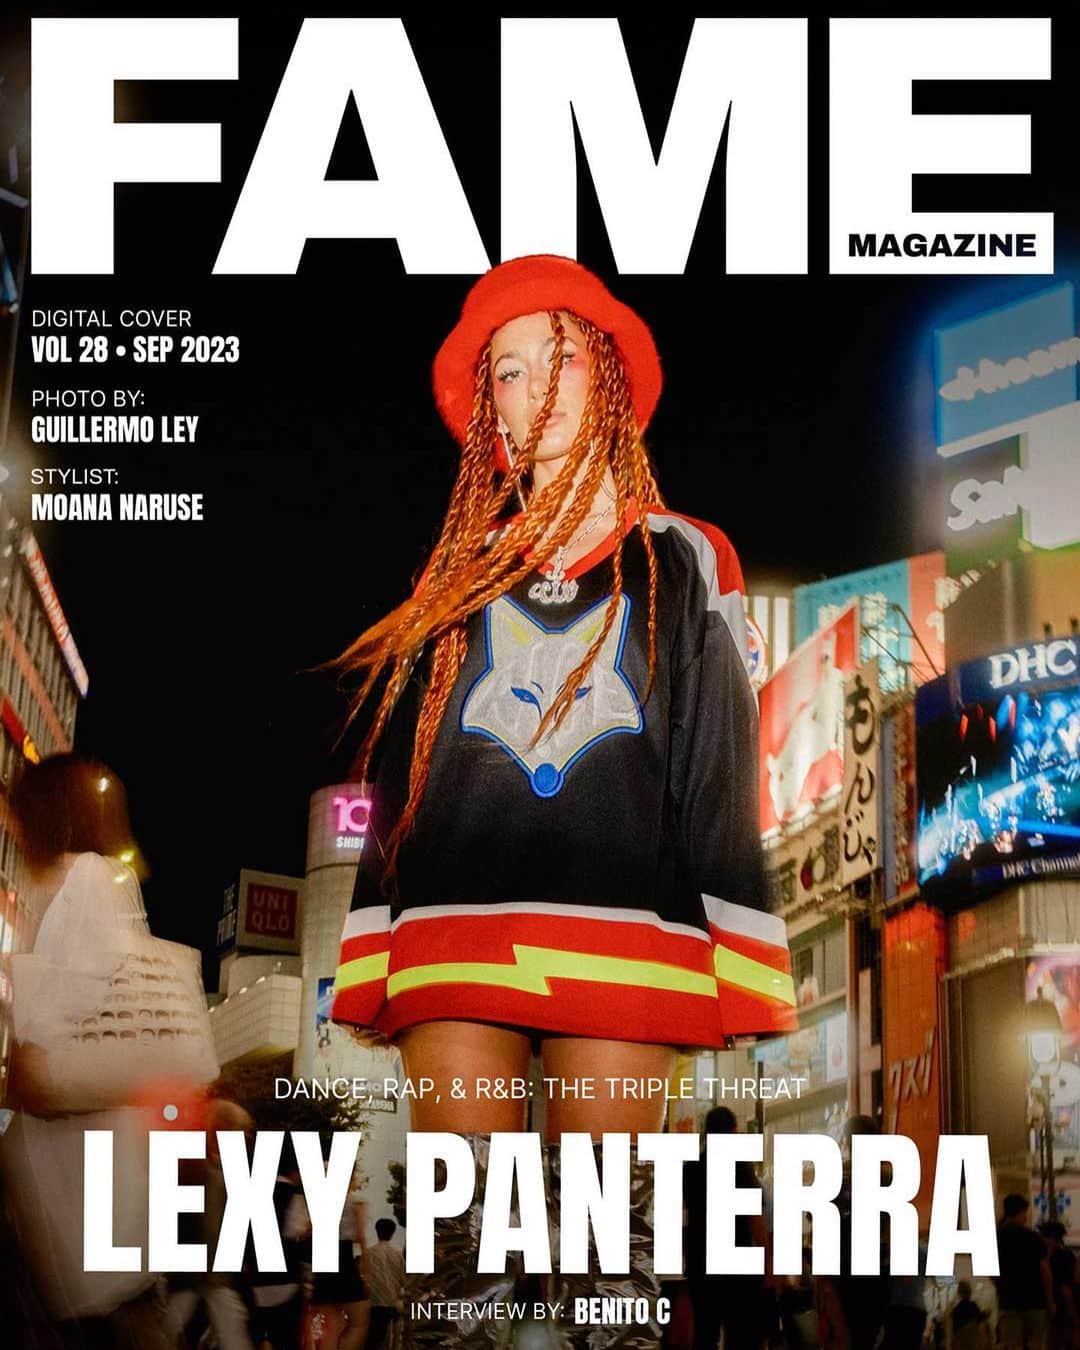 moanaのインスタグラム：「Styled by me @lexypanterra on @itsfamemag cover🔥🔥🔥  @itsfamemag  ・・・ Cover Story: In an ever-changing musical landscape, some artists uniquely distinguish themselves, not merely through their sound, but also through the profound impact they leave. Meet Lexy Panterra (@lexypanterra), a versatile artist who doesn’t confine herself to one genre, drawing in a staggering 9 million loyal followers. She isn’t merely contributing to the world of music; she’s weaving an entirely new tapestry while inspiring countless with her potent message. • The artist isn’t just any singer or dancer; she’s a luminous blend of strength, genuineness, and empowerment. Boasting over 9 million followers across her platforms and an impressive 500 million views and 1 billion impressions, Panterra’s musical journey is one for the books. Tracks like “Where Do You Go” and “More Than You” have charted her path to Billboard’s Top 100, crowning her a musical empress in her own right.  • Read more of our Fame Magazine digital cover story out now FAME MAGAZINE #LexyPanterra #FameCover  #FAMeMag #FameMagazine  •  MUSE Lexy Panterra @lexypanterra  PRODUCTION/PR Burgerrock Media @burgerrockmedia Irma Penunuri @burgerrock  PHOTOGRAPHER  Guillermo Ley @gleyallday  STYLIST Moana Naruse @moannu Cover outfit @membersoftherage by @kidcudi / @nubian_tokyo   PRODUCTION ASSISTANT Karla Gonzalez @karlitaa21 Jose Vielman @josevielman  INTERVIEW Benito C   POST PRODUCTION CREATIVE @UADV x @AlexQuin」